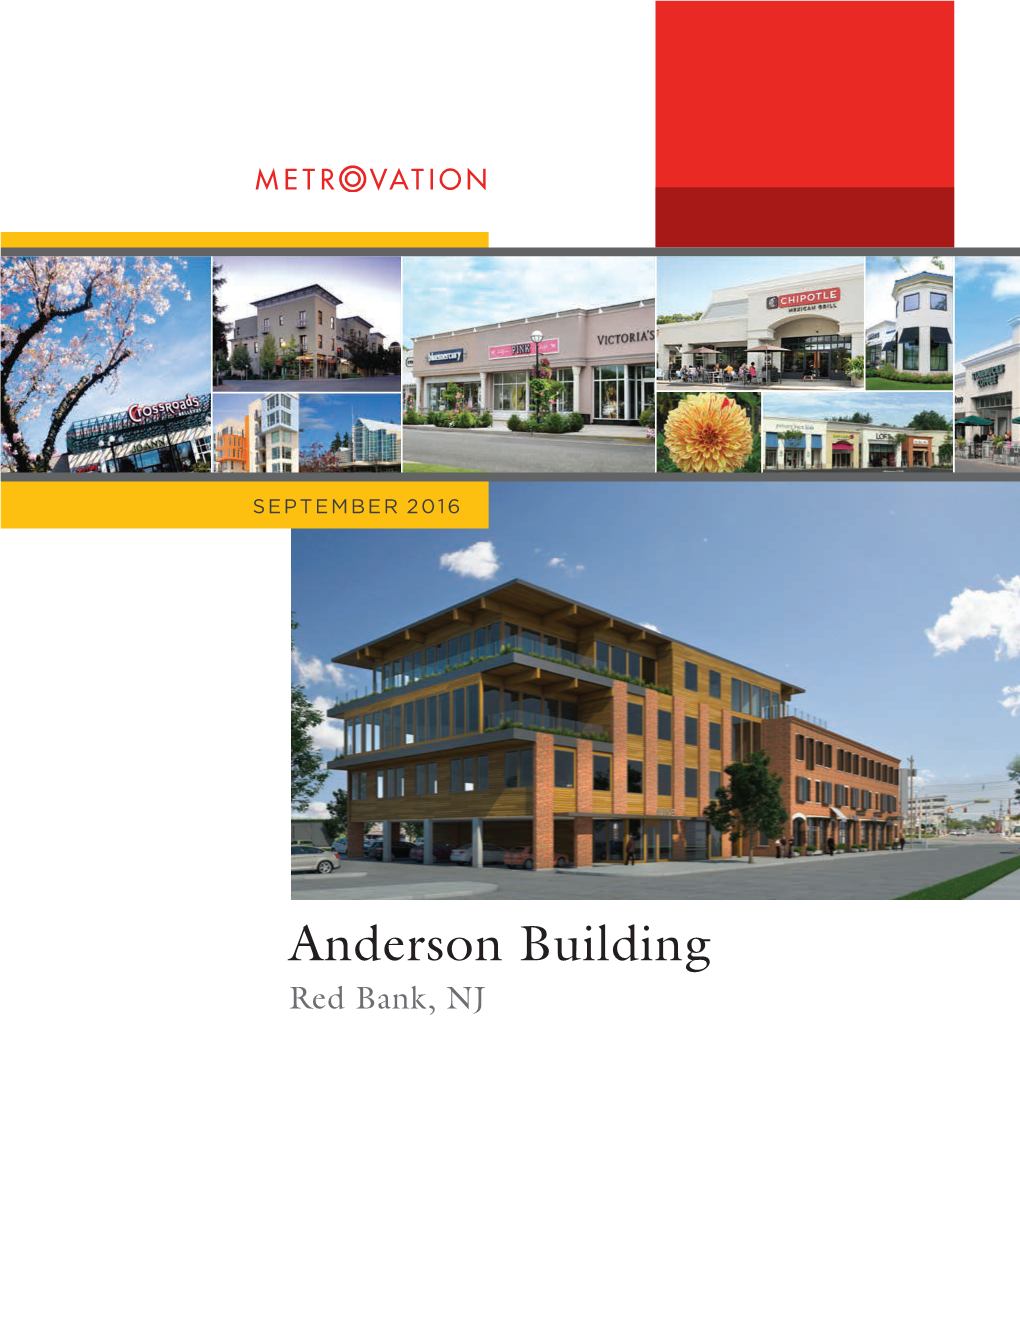 Anderson Building Red Bank, NJ Metrovation